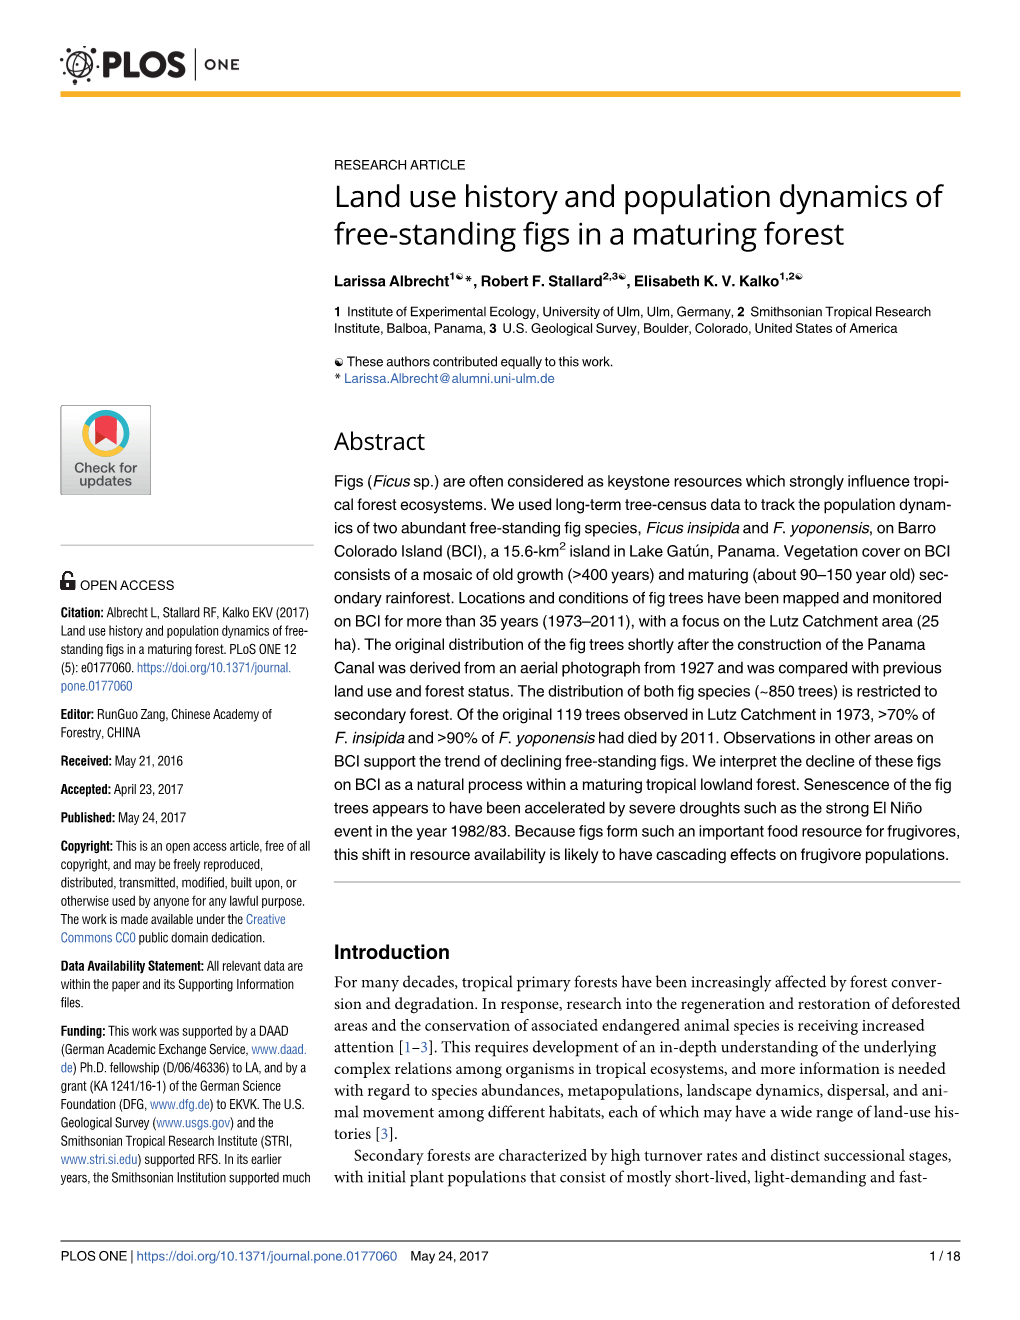 Land Use History and Population Dynamics of Free-Standing Figs in a Maturing Forest